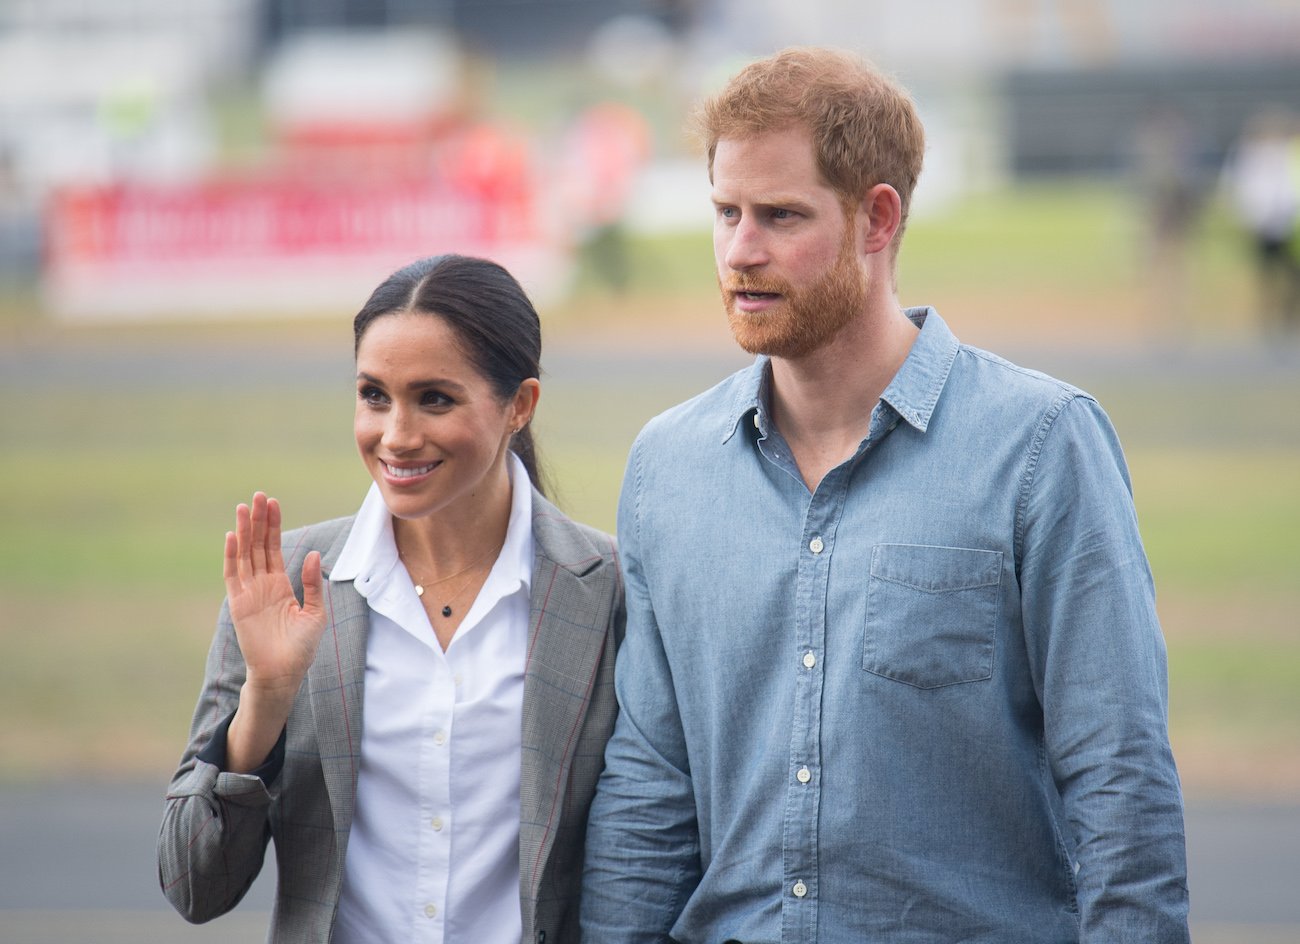 Royal Expert Claims Meghan Markle ‘Brought Out the Most Evil Side’ of Prince Harry: ‘It’s Shameful’